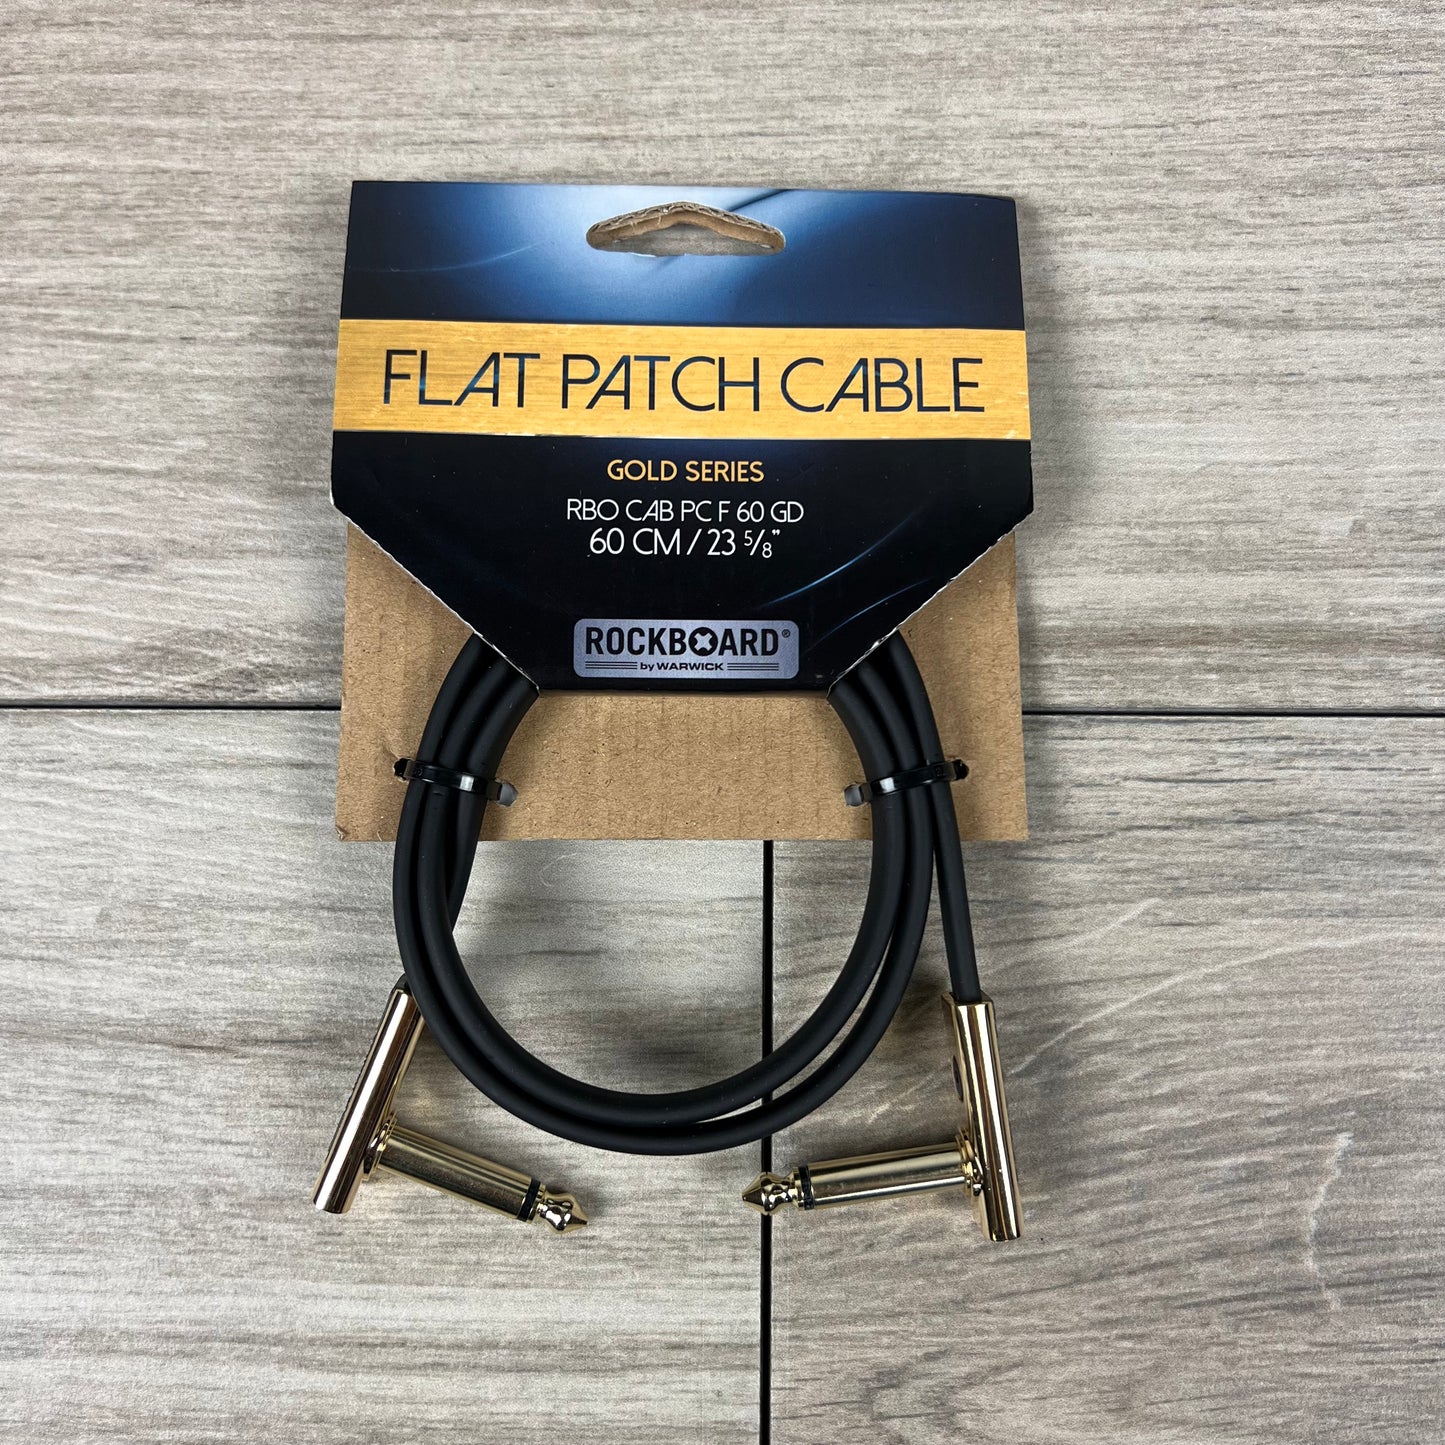 RockBoard Gold Series Flat Patch Cable, 60cm / 23-5/8"